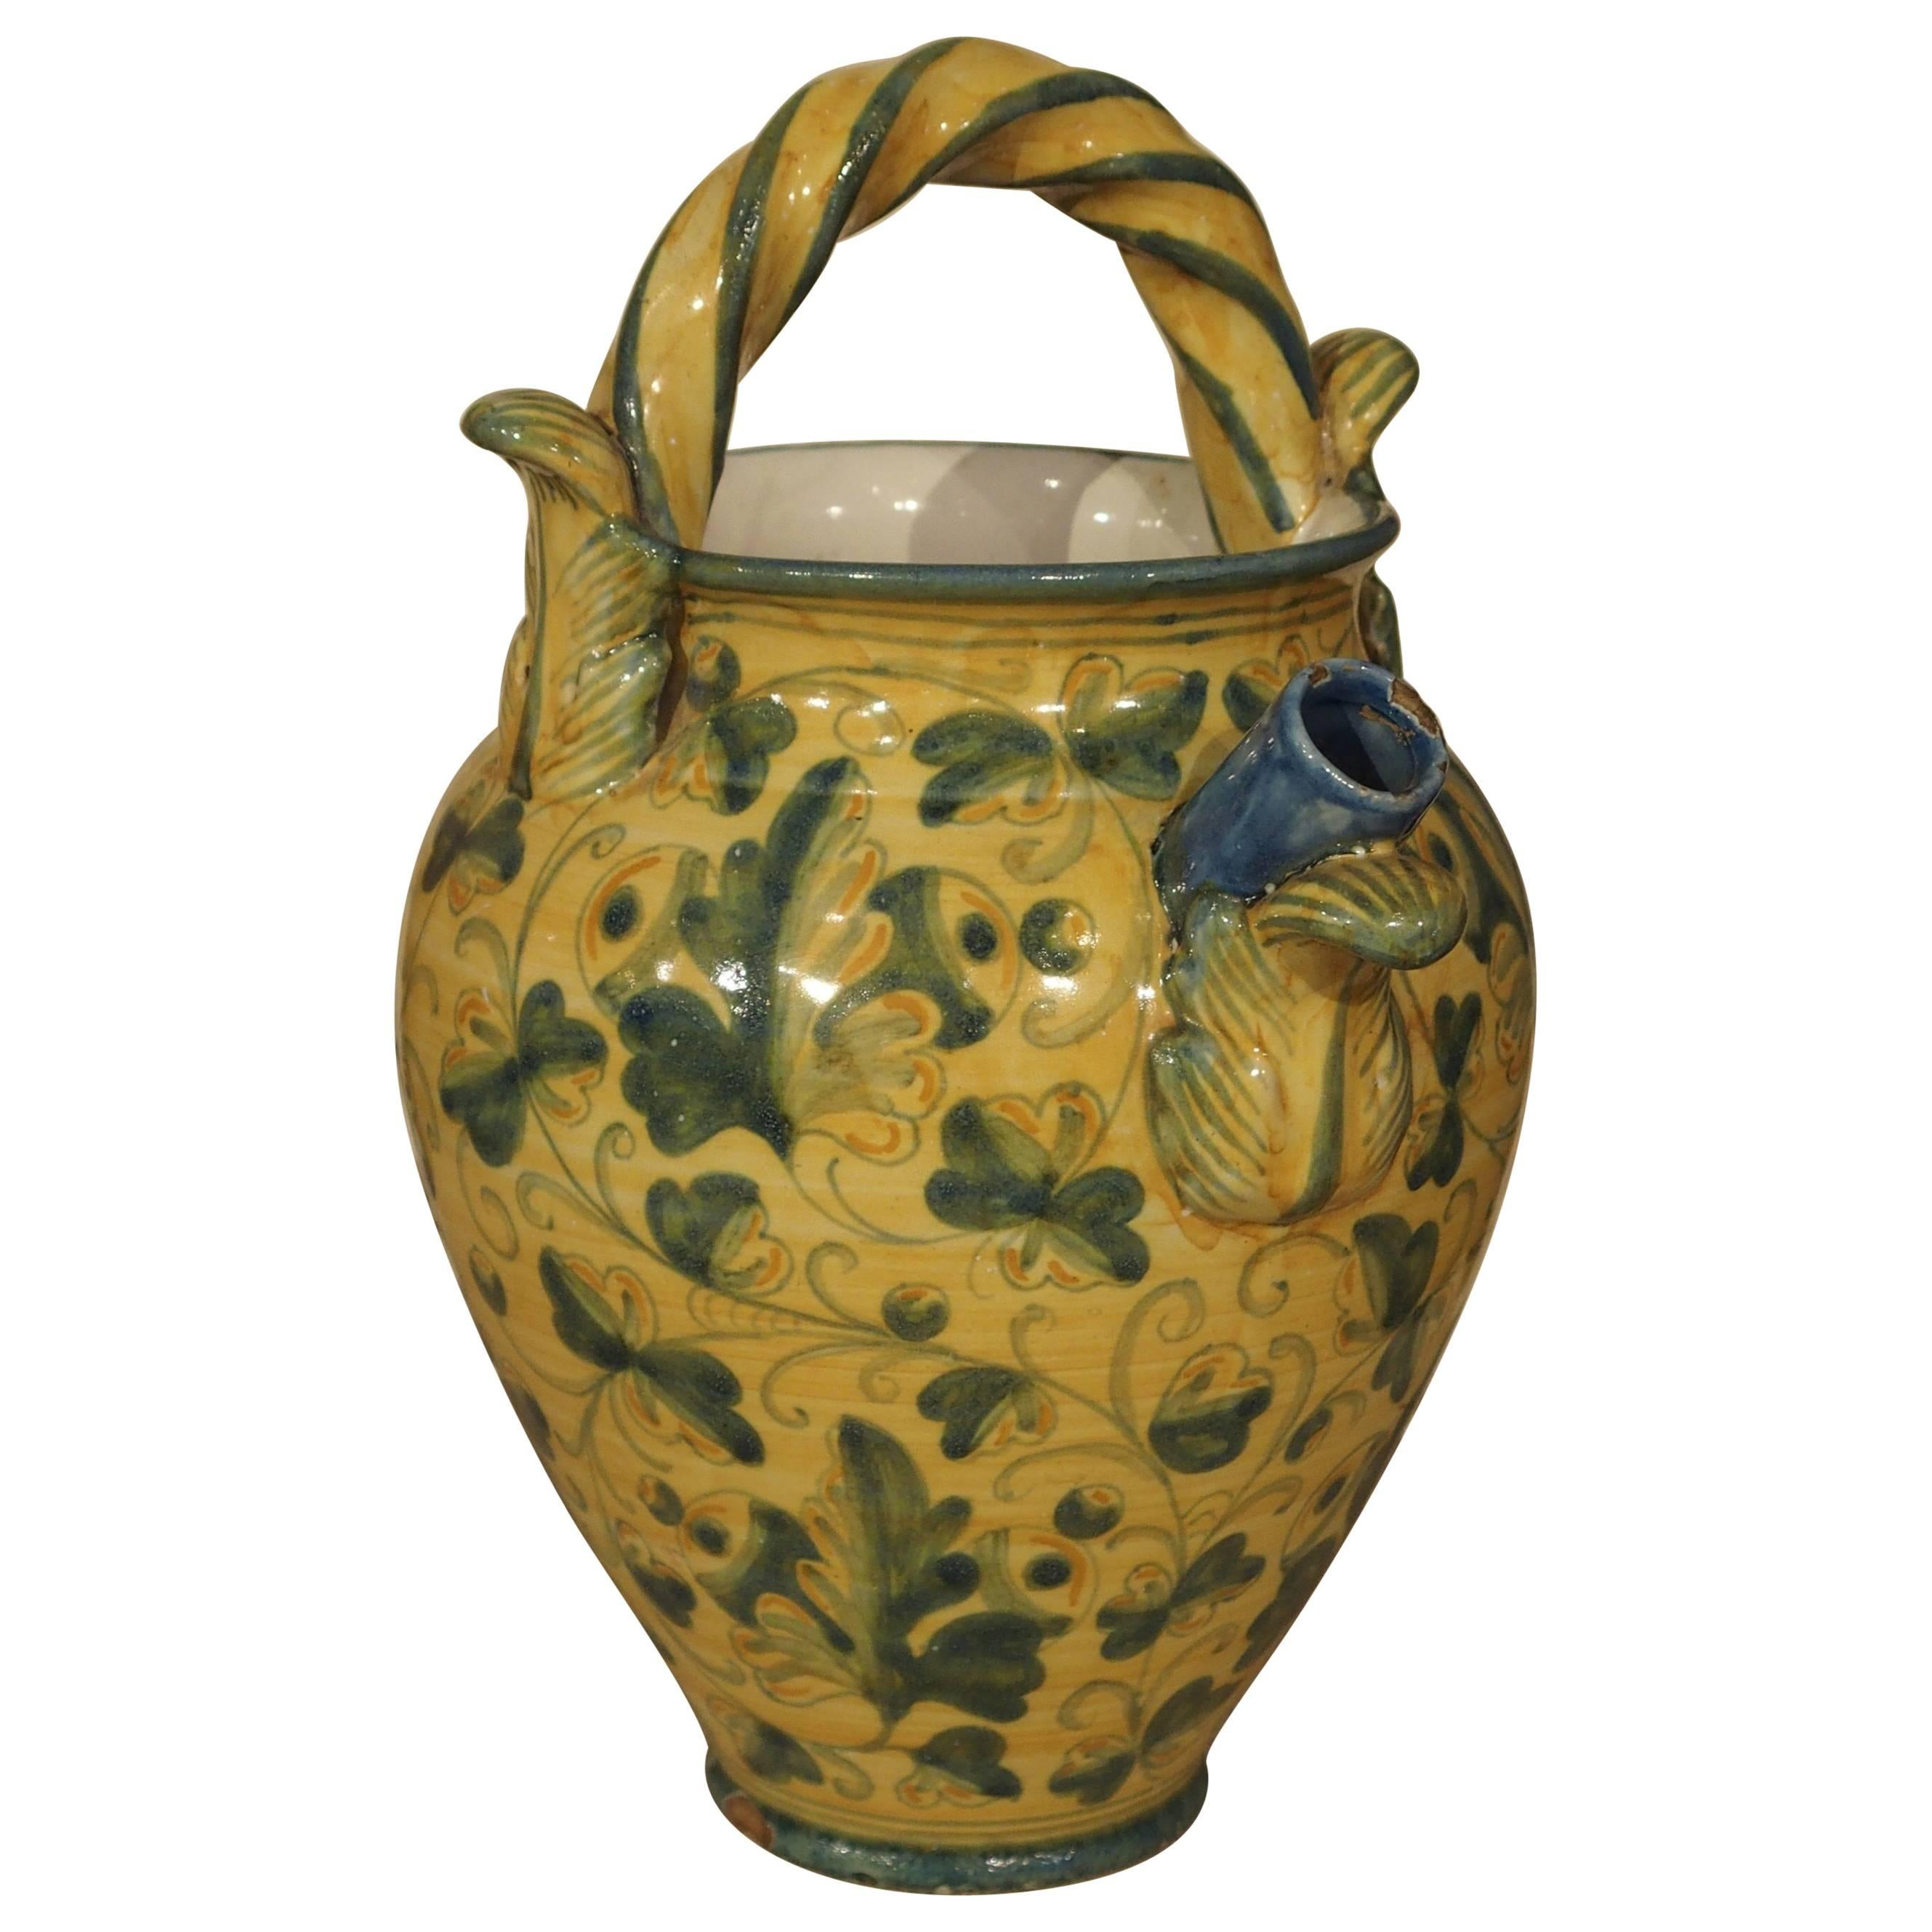 Antique Majolica Apothecary Jar from Italy, 19th Century